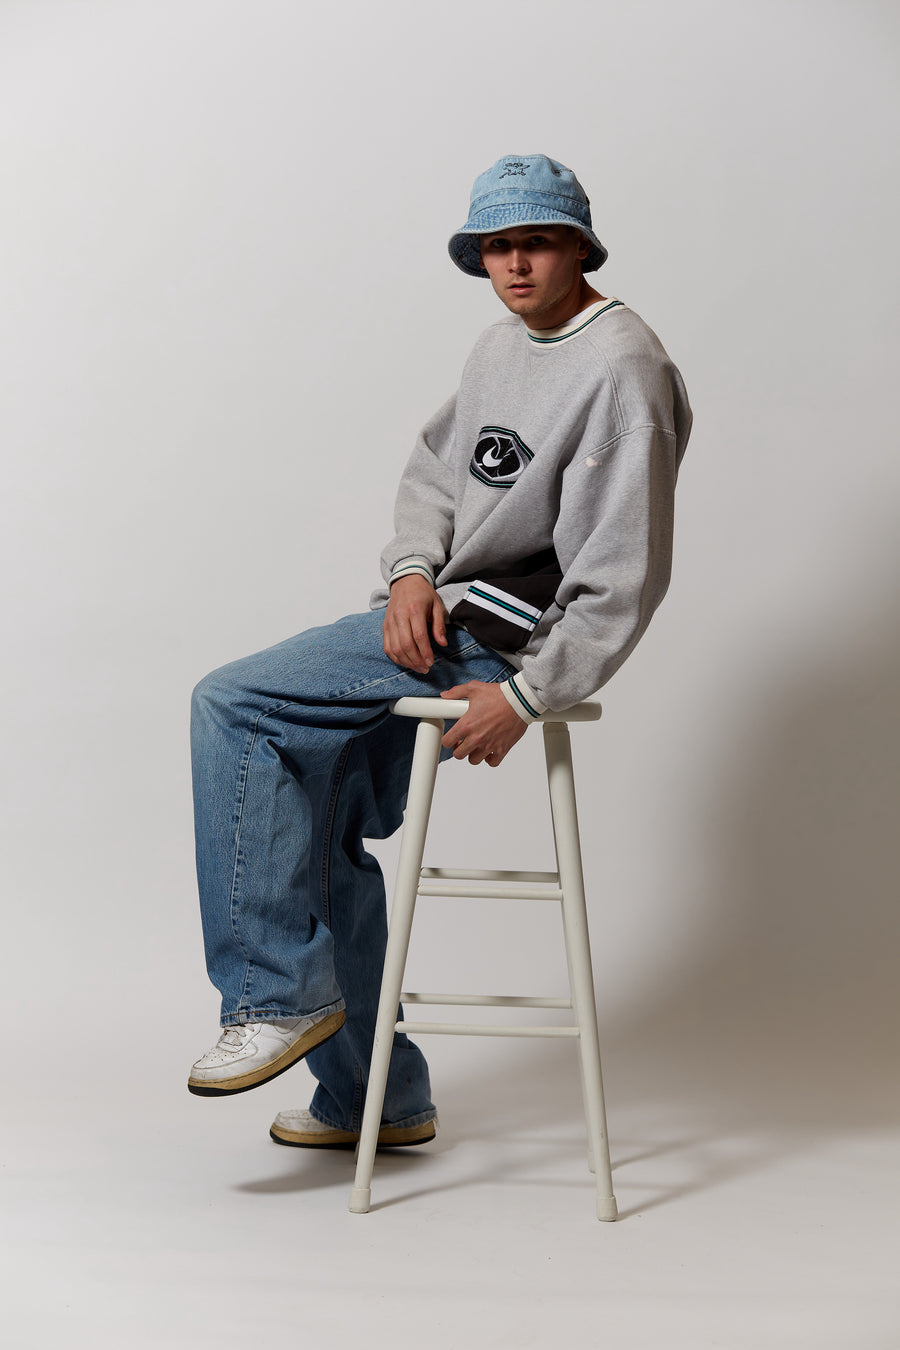 90s Nike Embroidered Swoosh Sweatshirt in a vintage style from thrift store Twise Studio